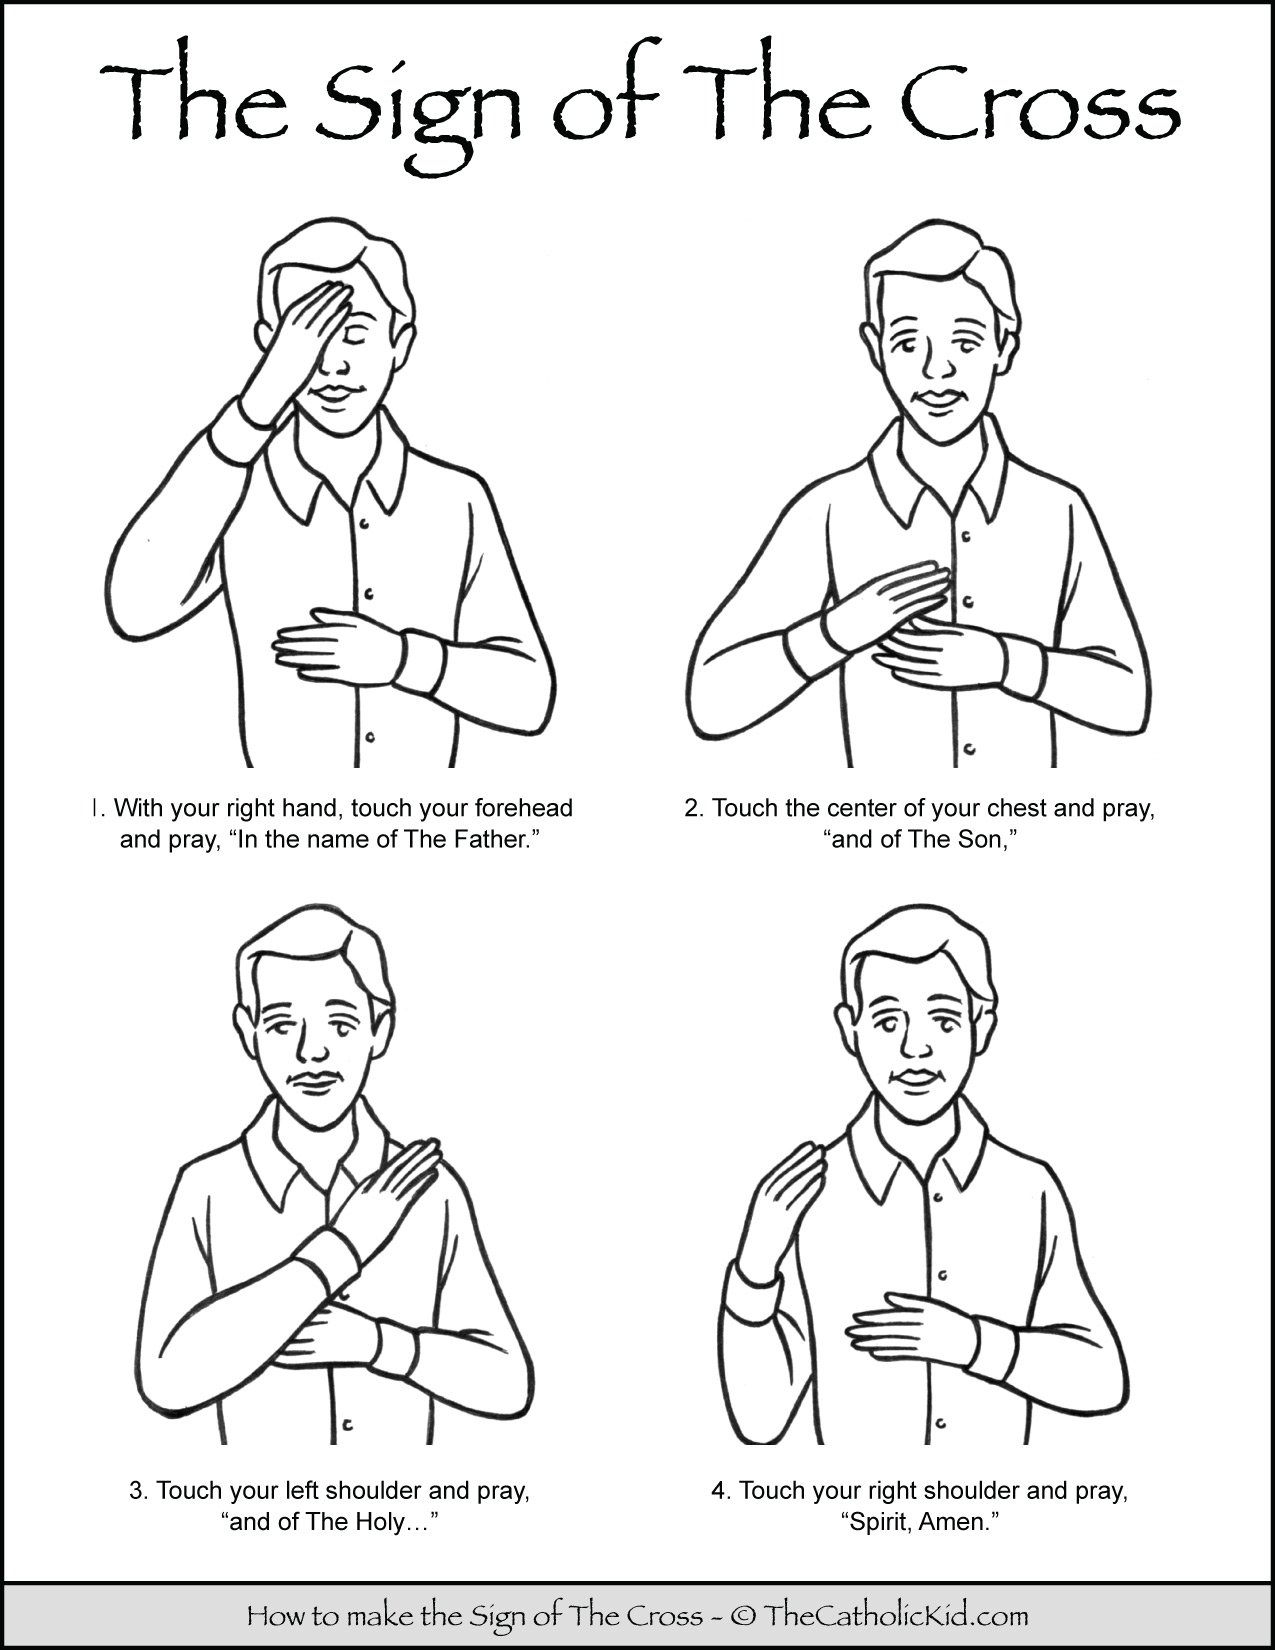 How to make the sign of the cross